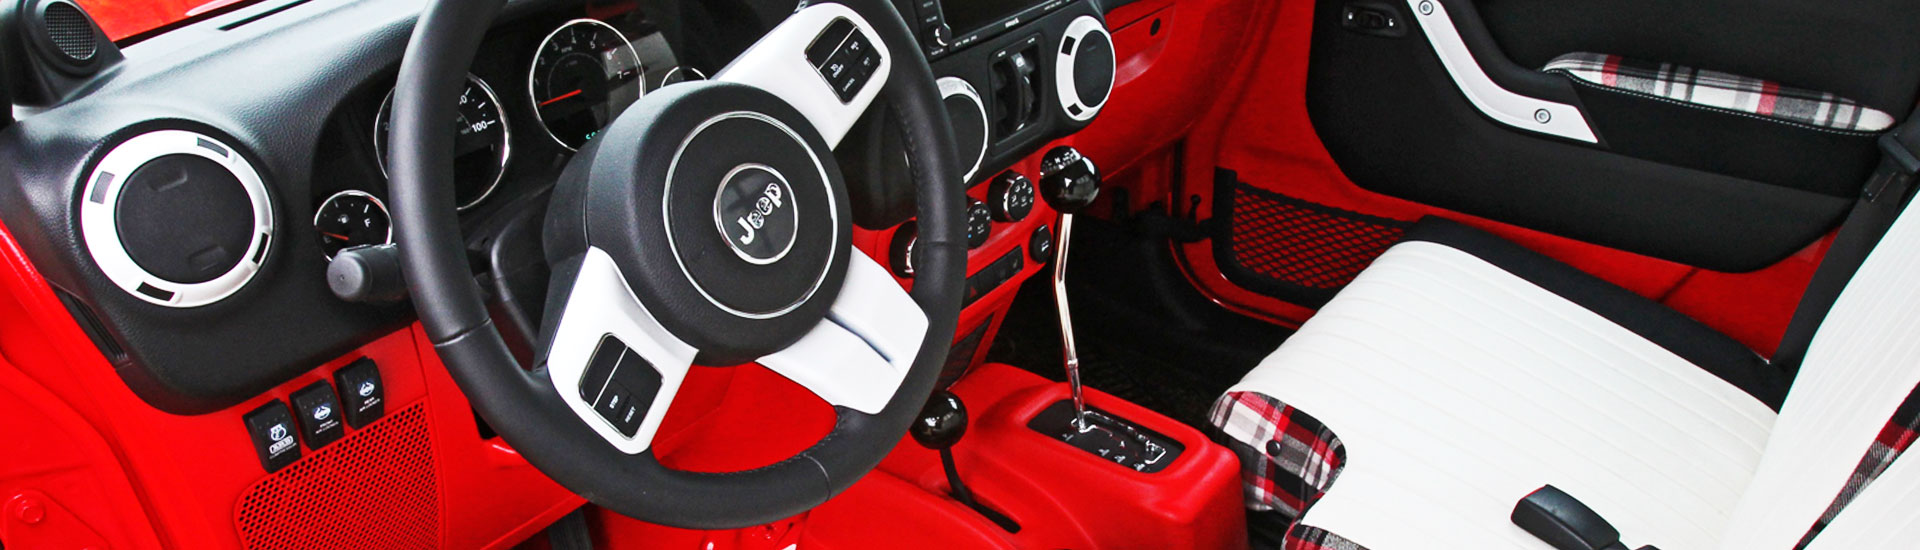 Cherry red dash kit inside Jeep